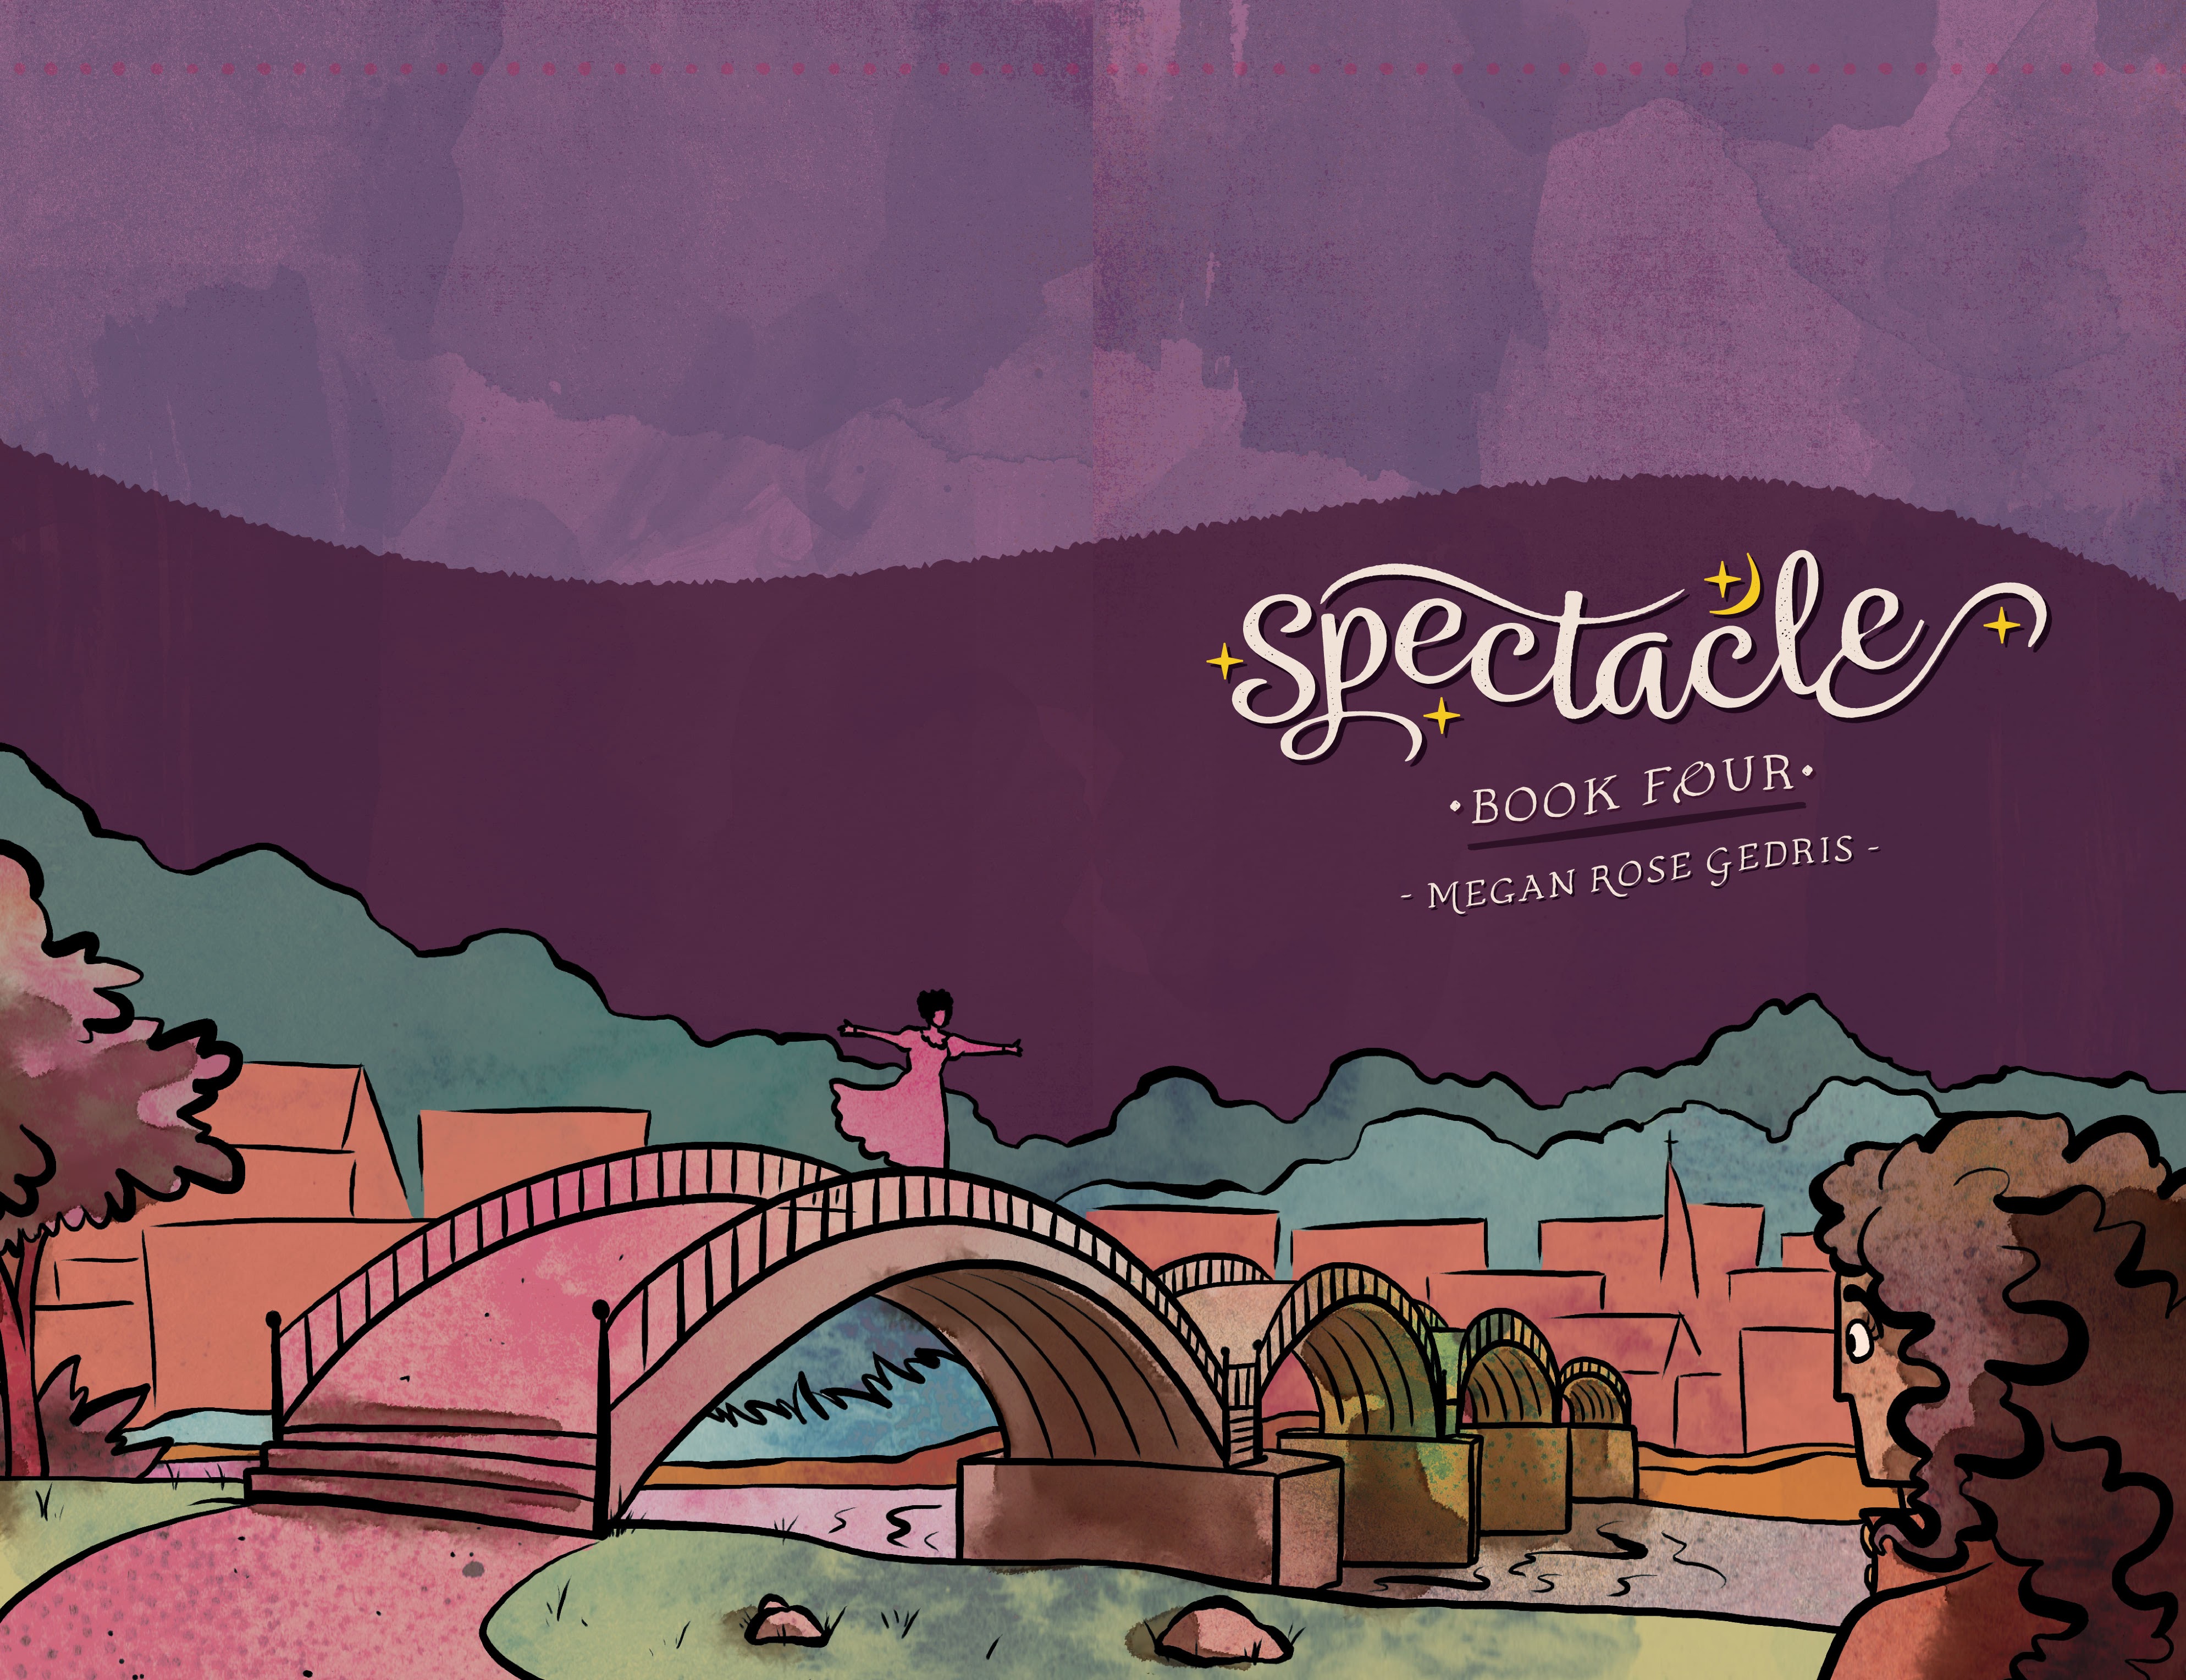 Read online Spectacle comic -  Issue # TPB 4 - 4